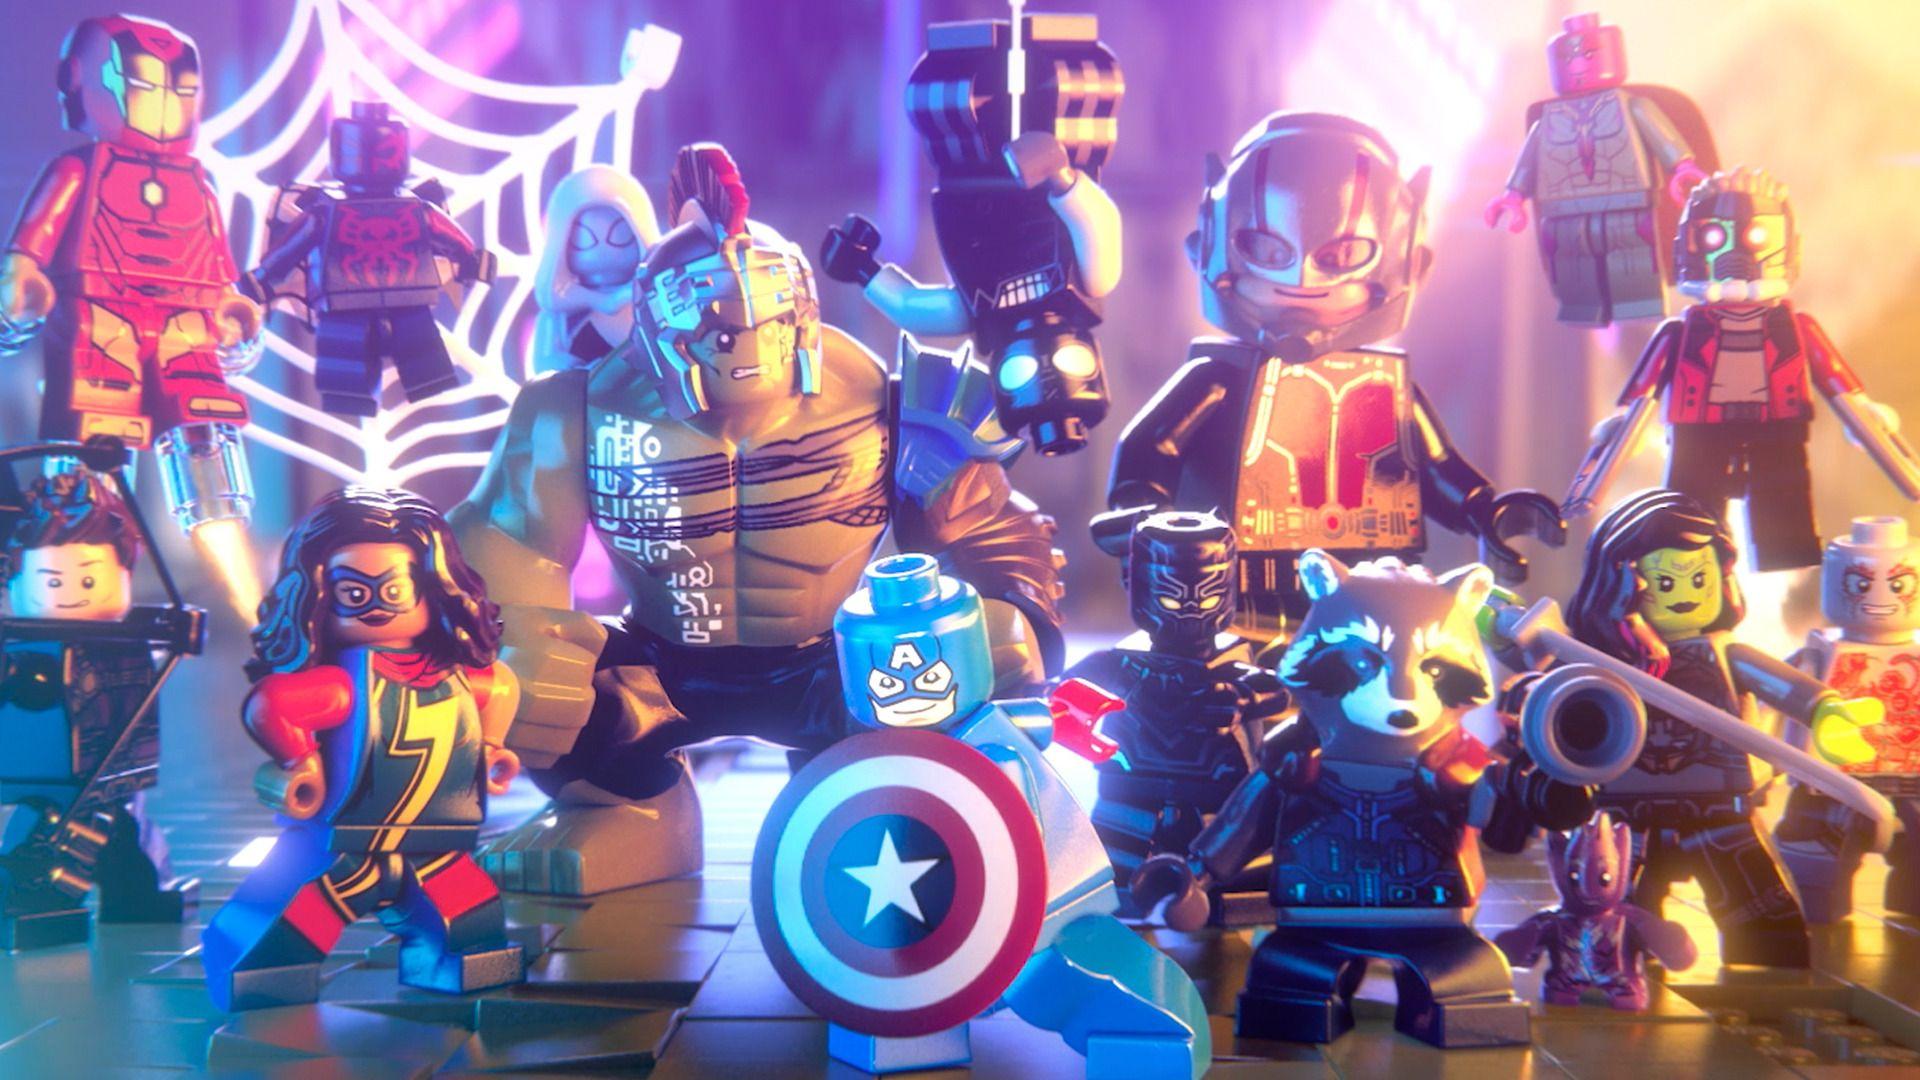 Lego Marvel Super Heroes 2 is now available on Xbox One